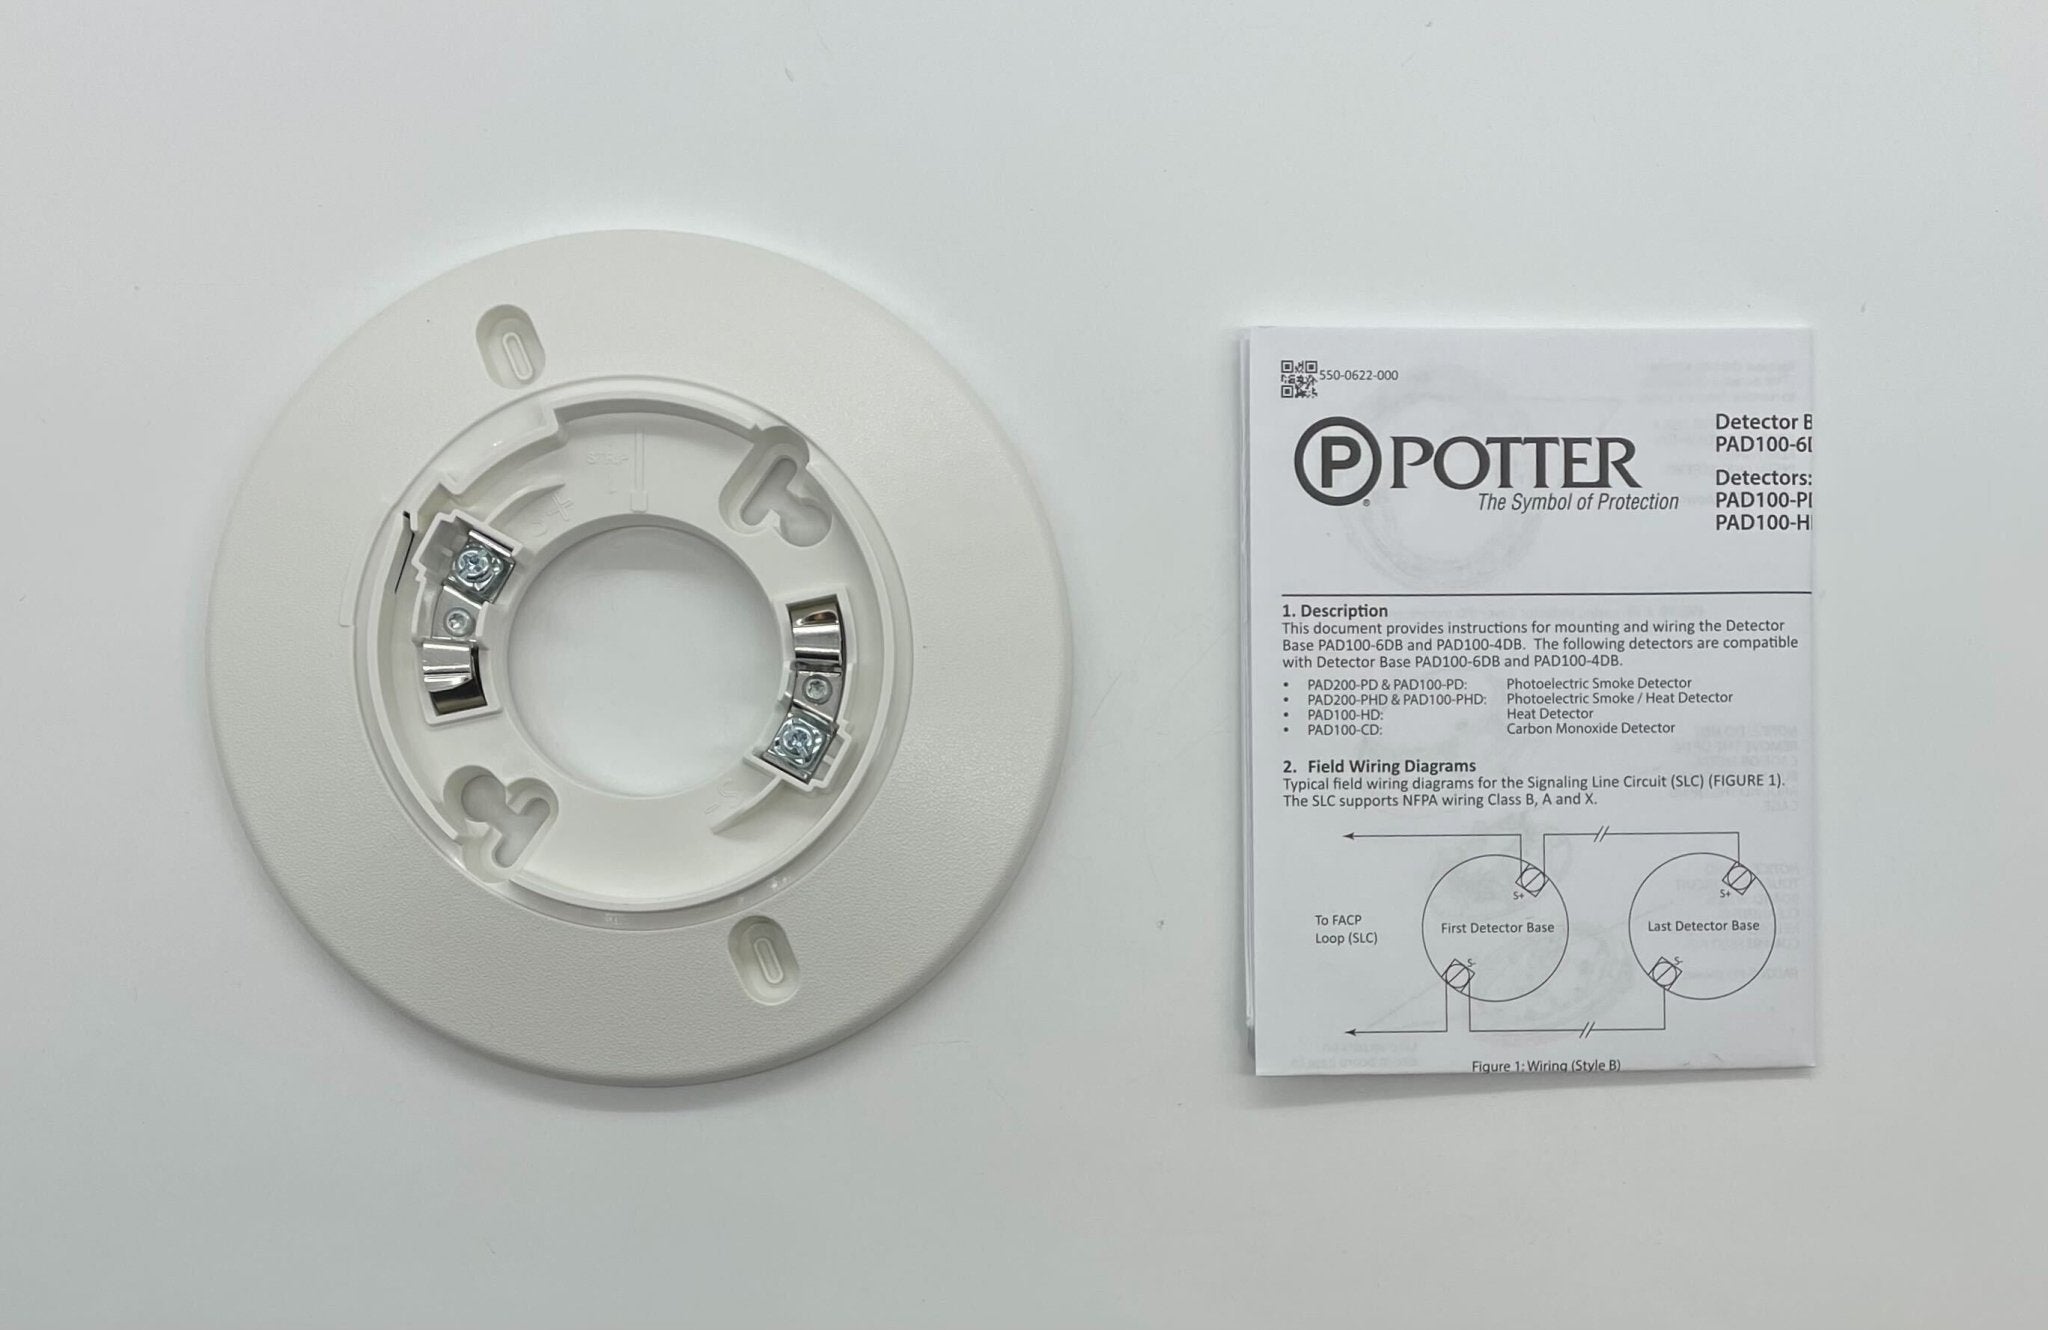 Potter PAD100-6DB 6” Addressable Detector Base - The Fire Alarm Supplier